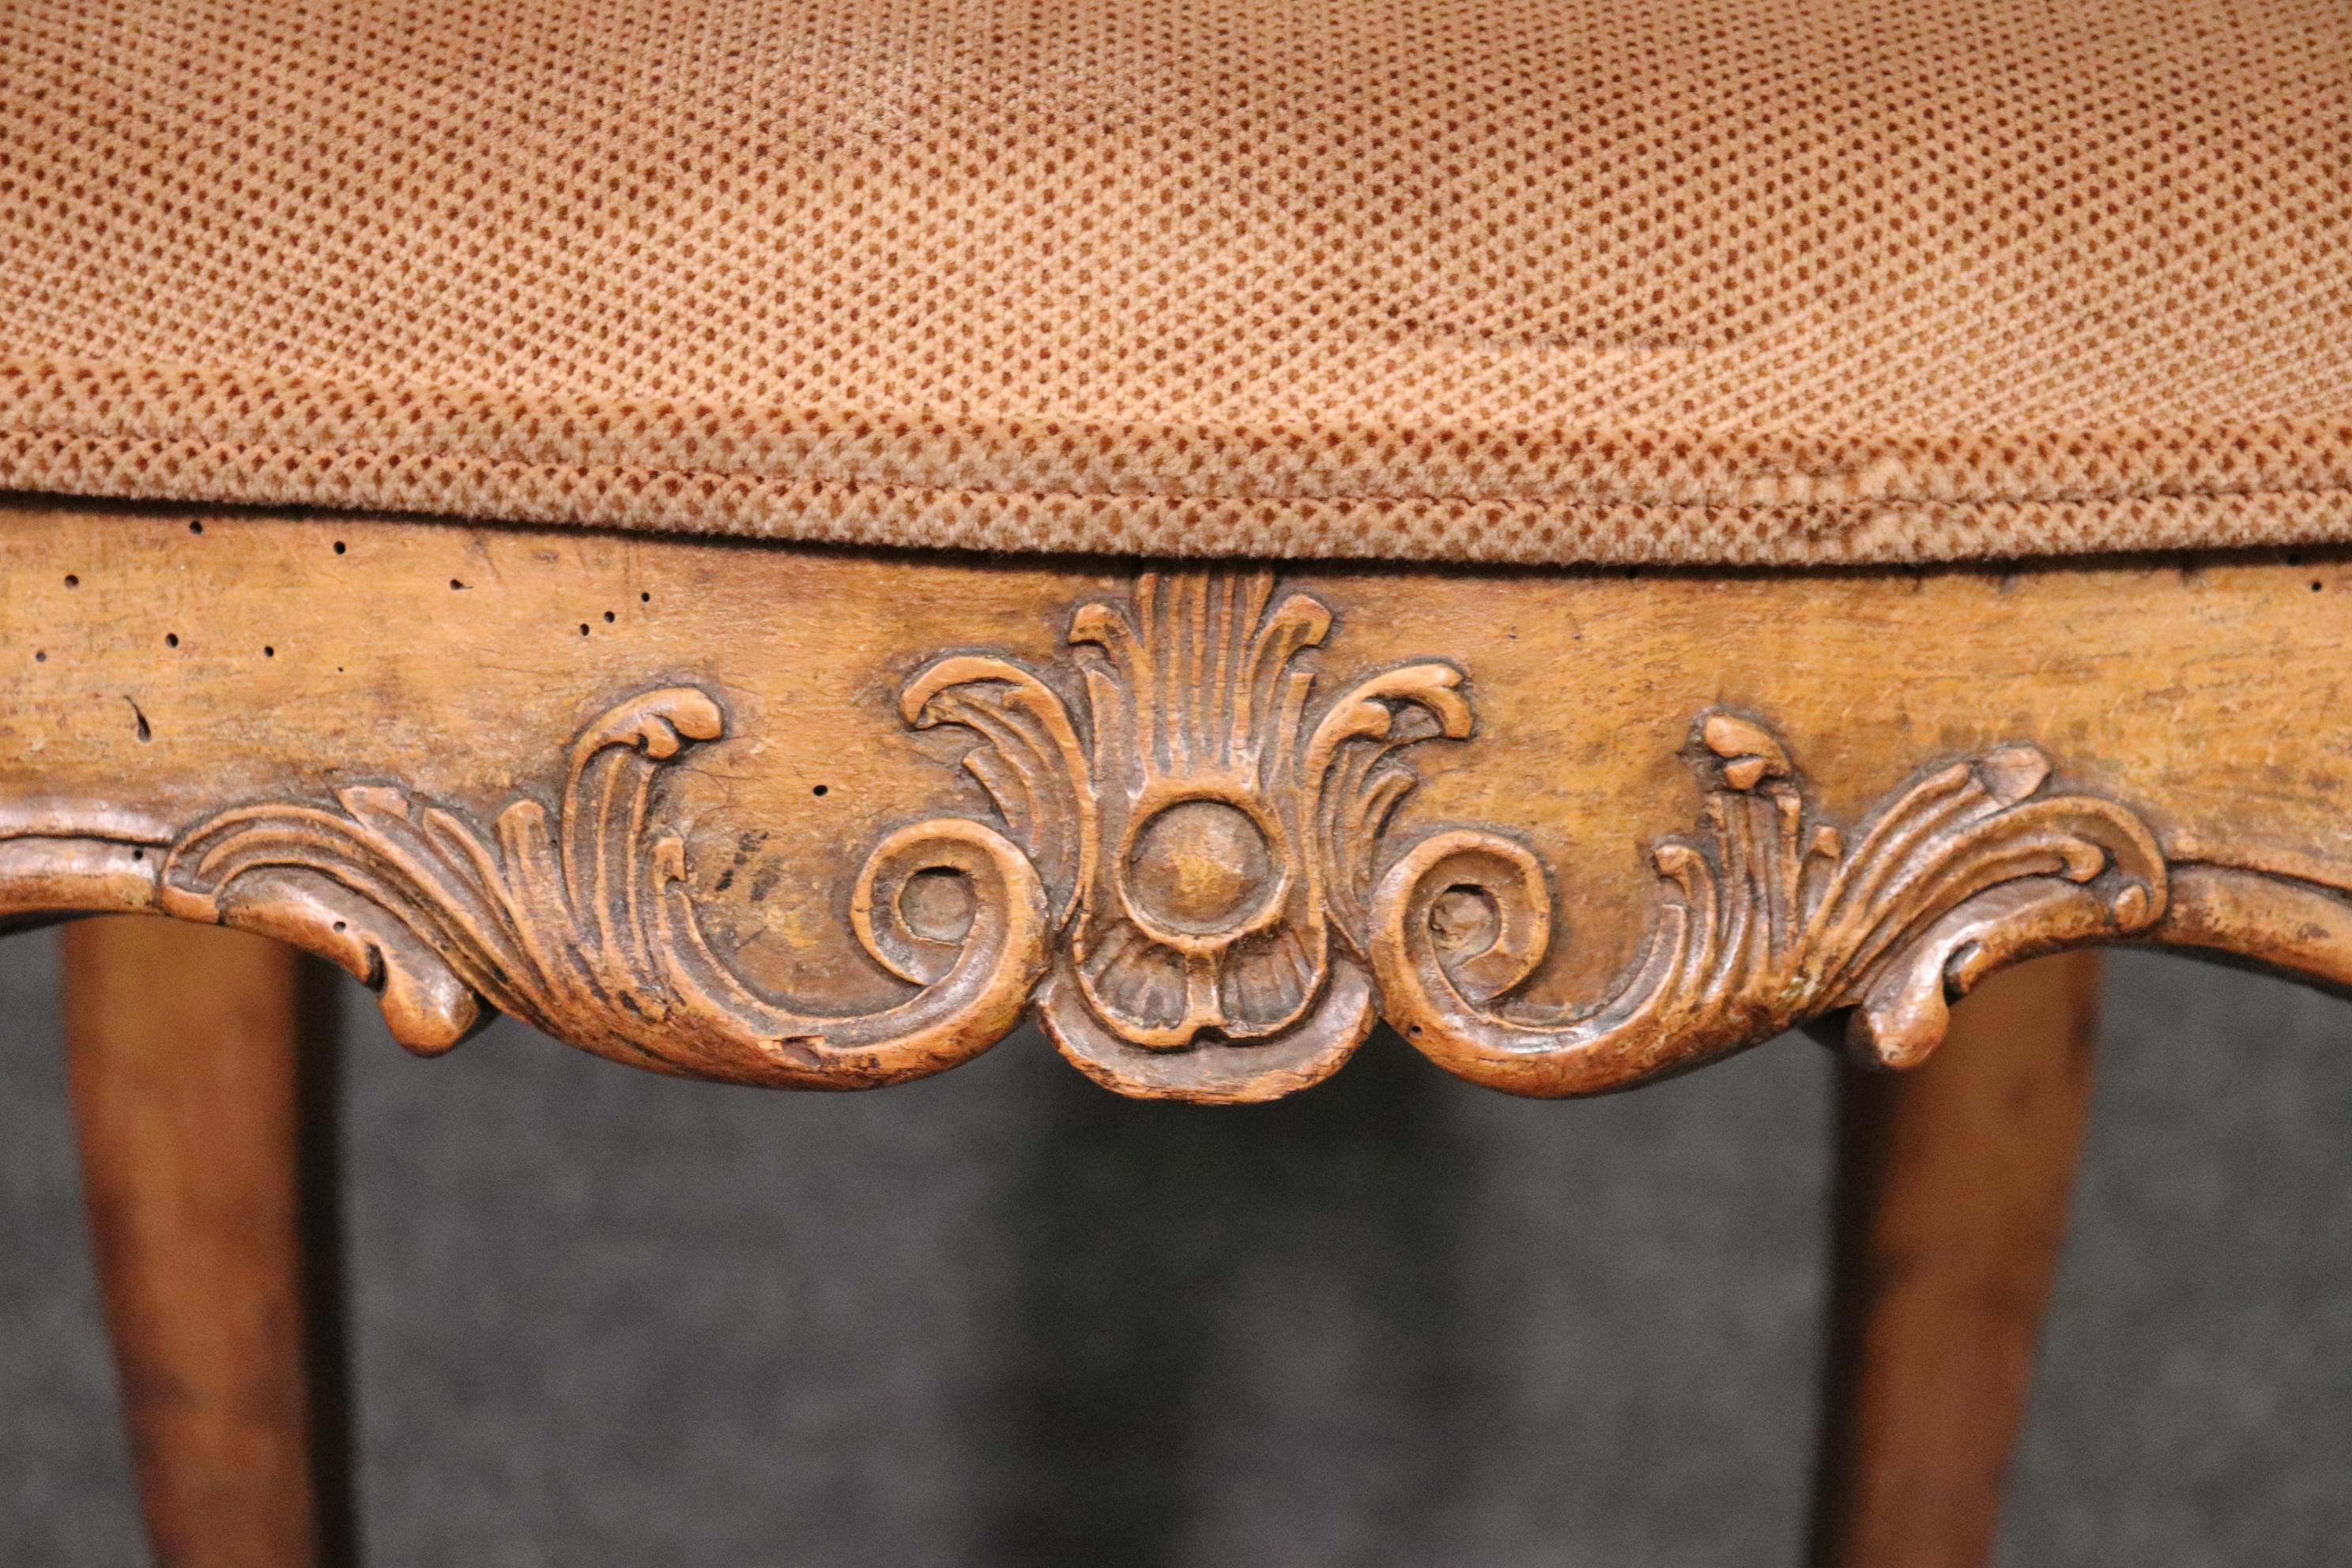 French Provincial Period 1770s Era Italian Provincial Walnut Desk or Vanity Chair For Sale